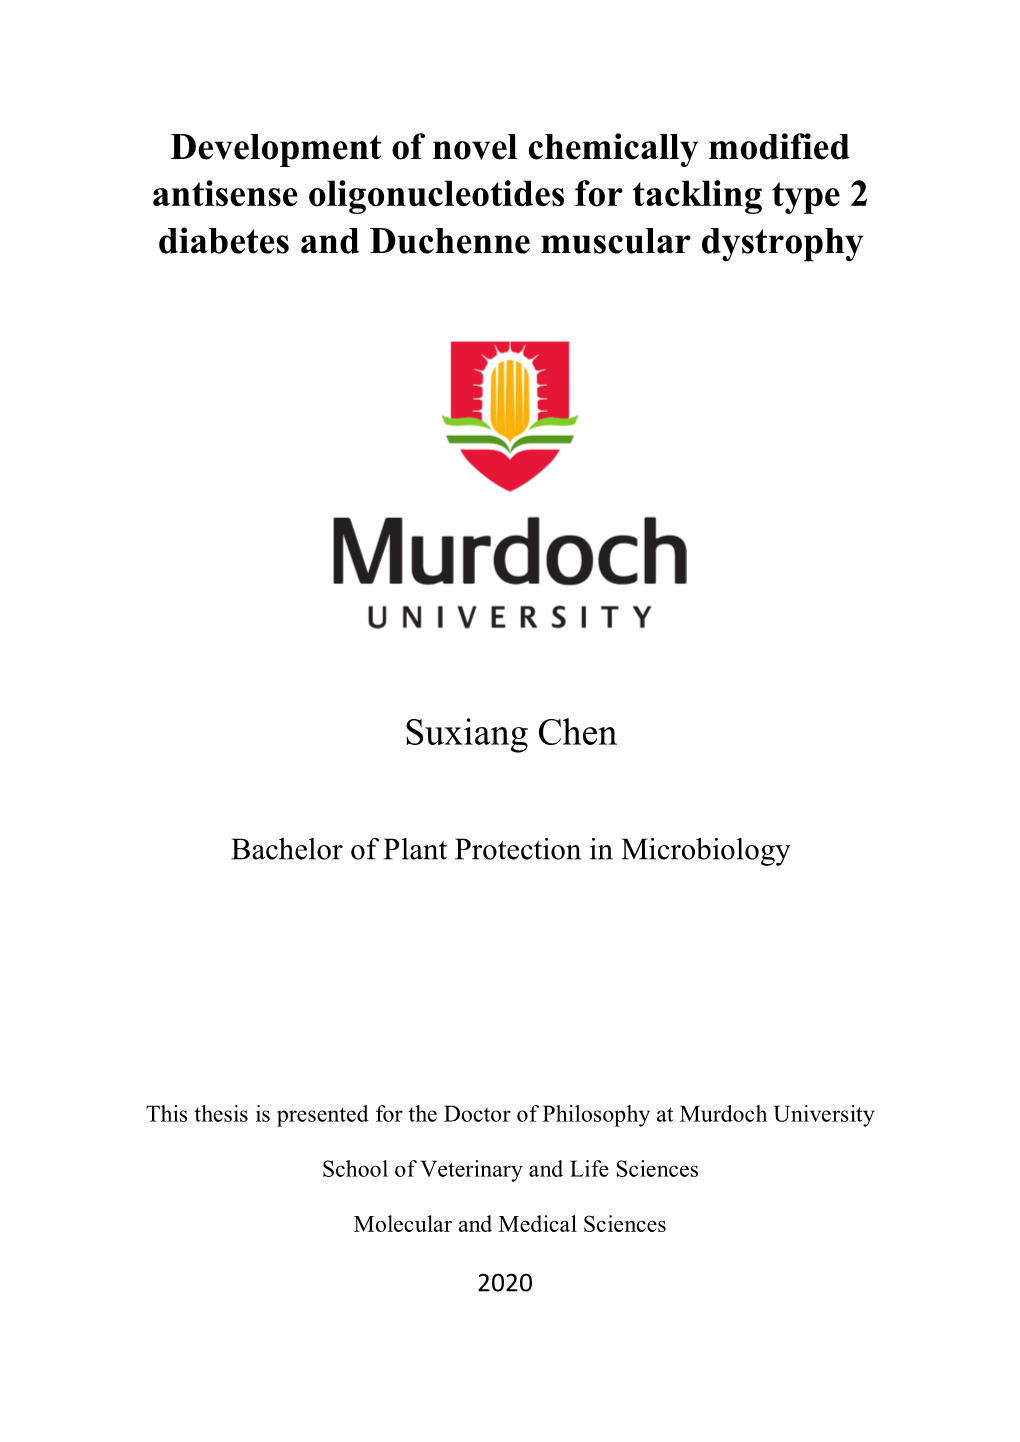 Development of Novel Chemically Modified Antisense Oligonucleotides for Tackling Type 2 Diabetes and Duchenne Muscular Dystrophy